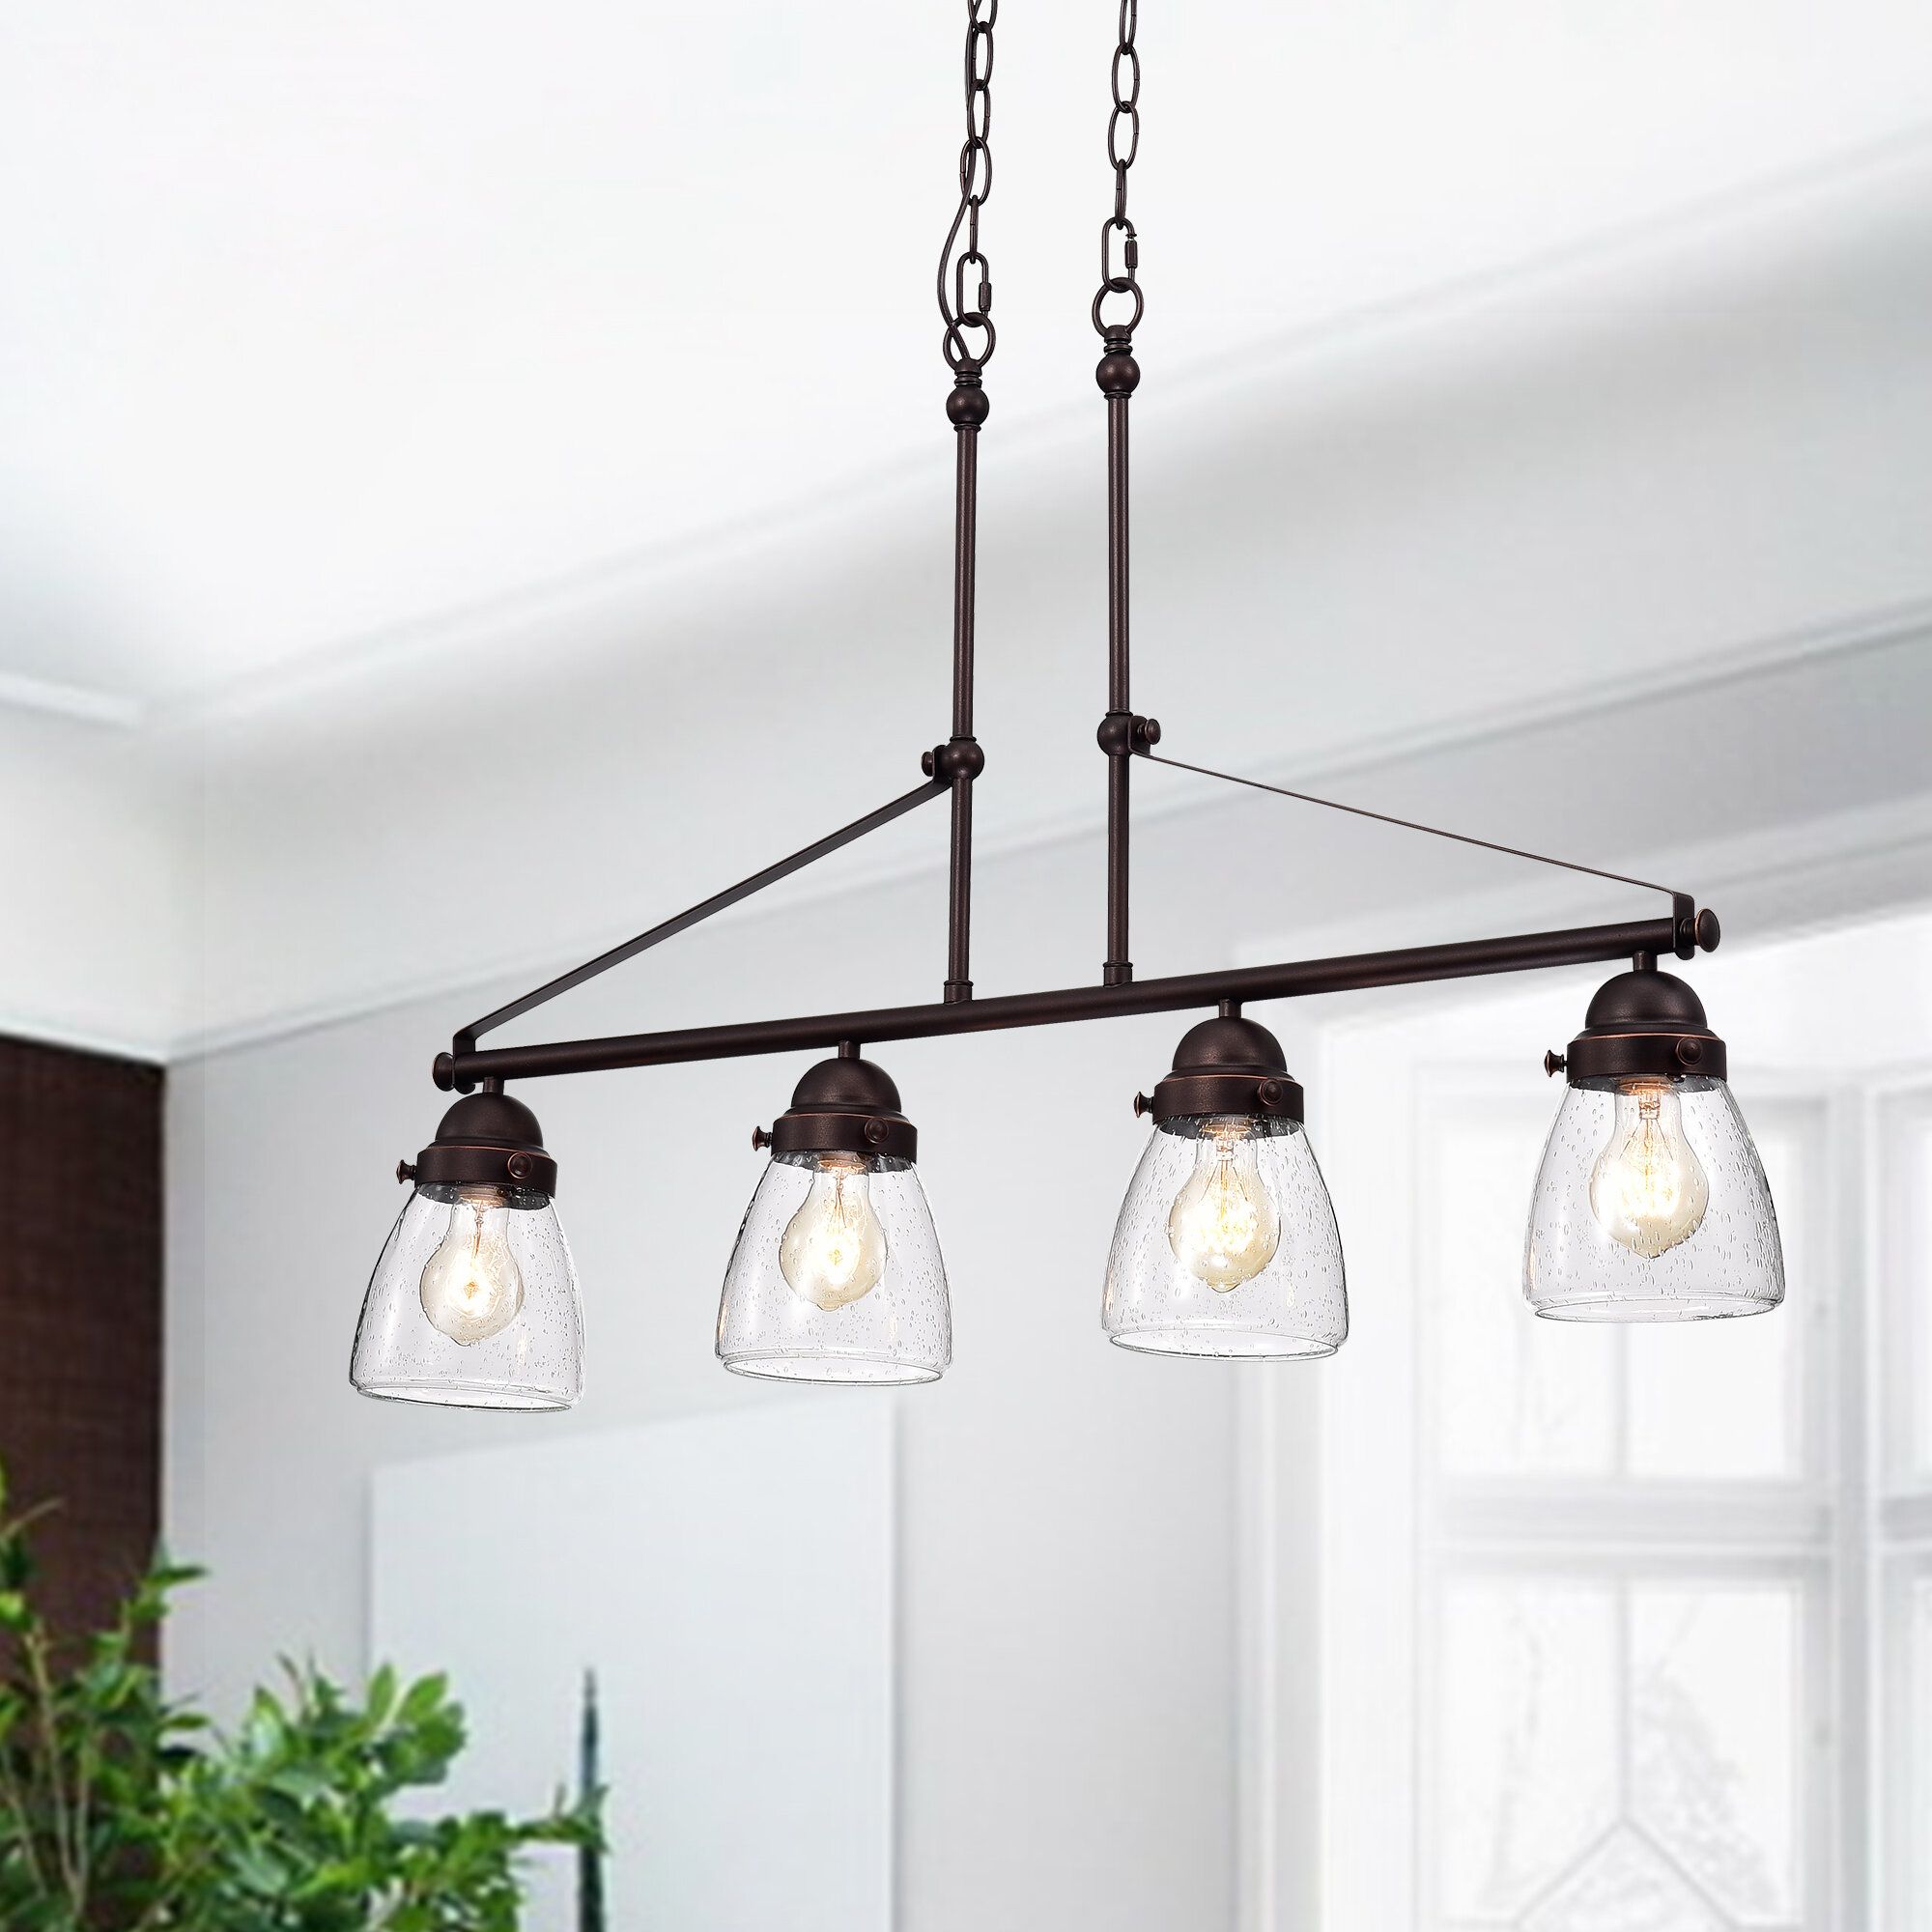 Wrought Iron Pendant Lighting Sale – Up To 65% Off Until With Rossi Industrial Vintage 1 Light Geometric Pendants (View 16 of 30)